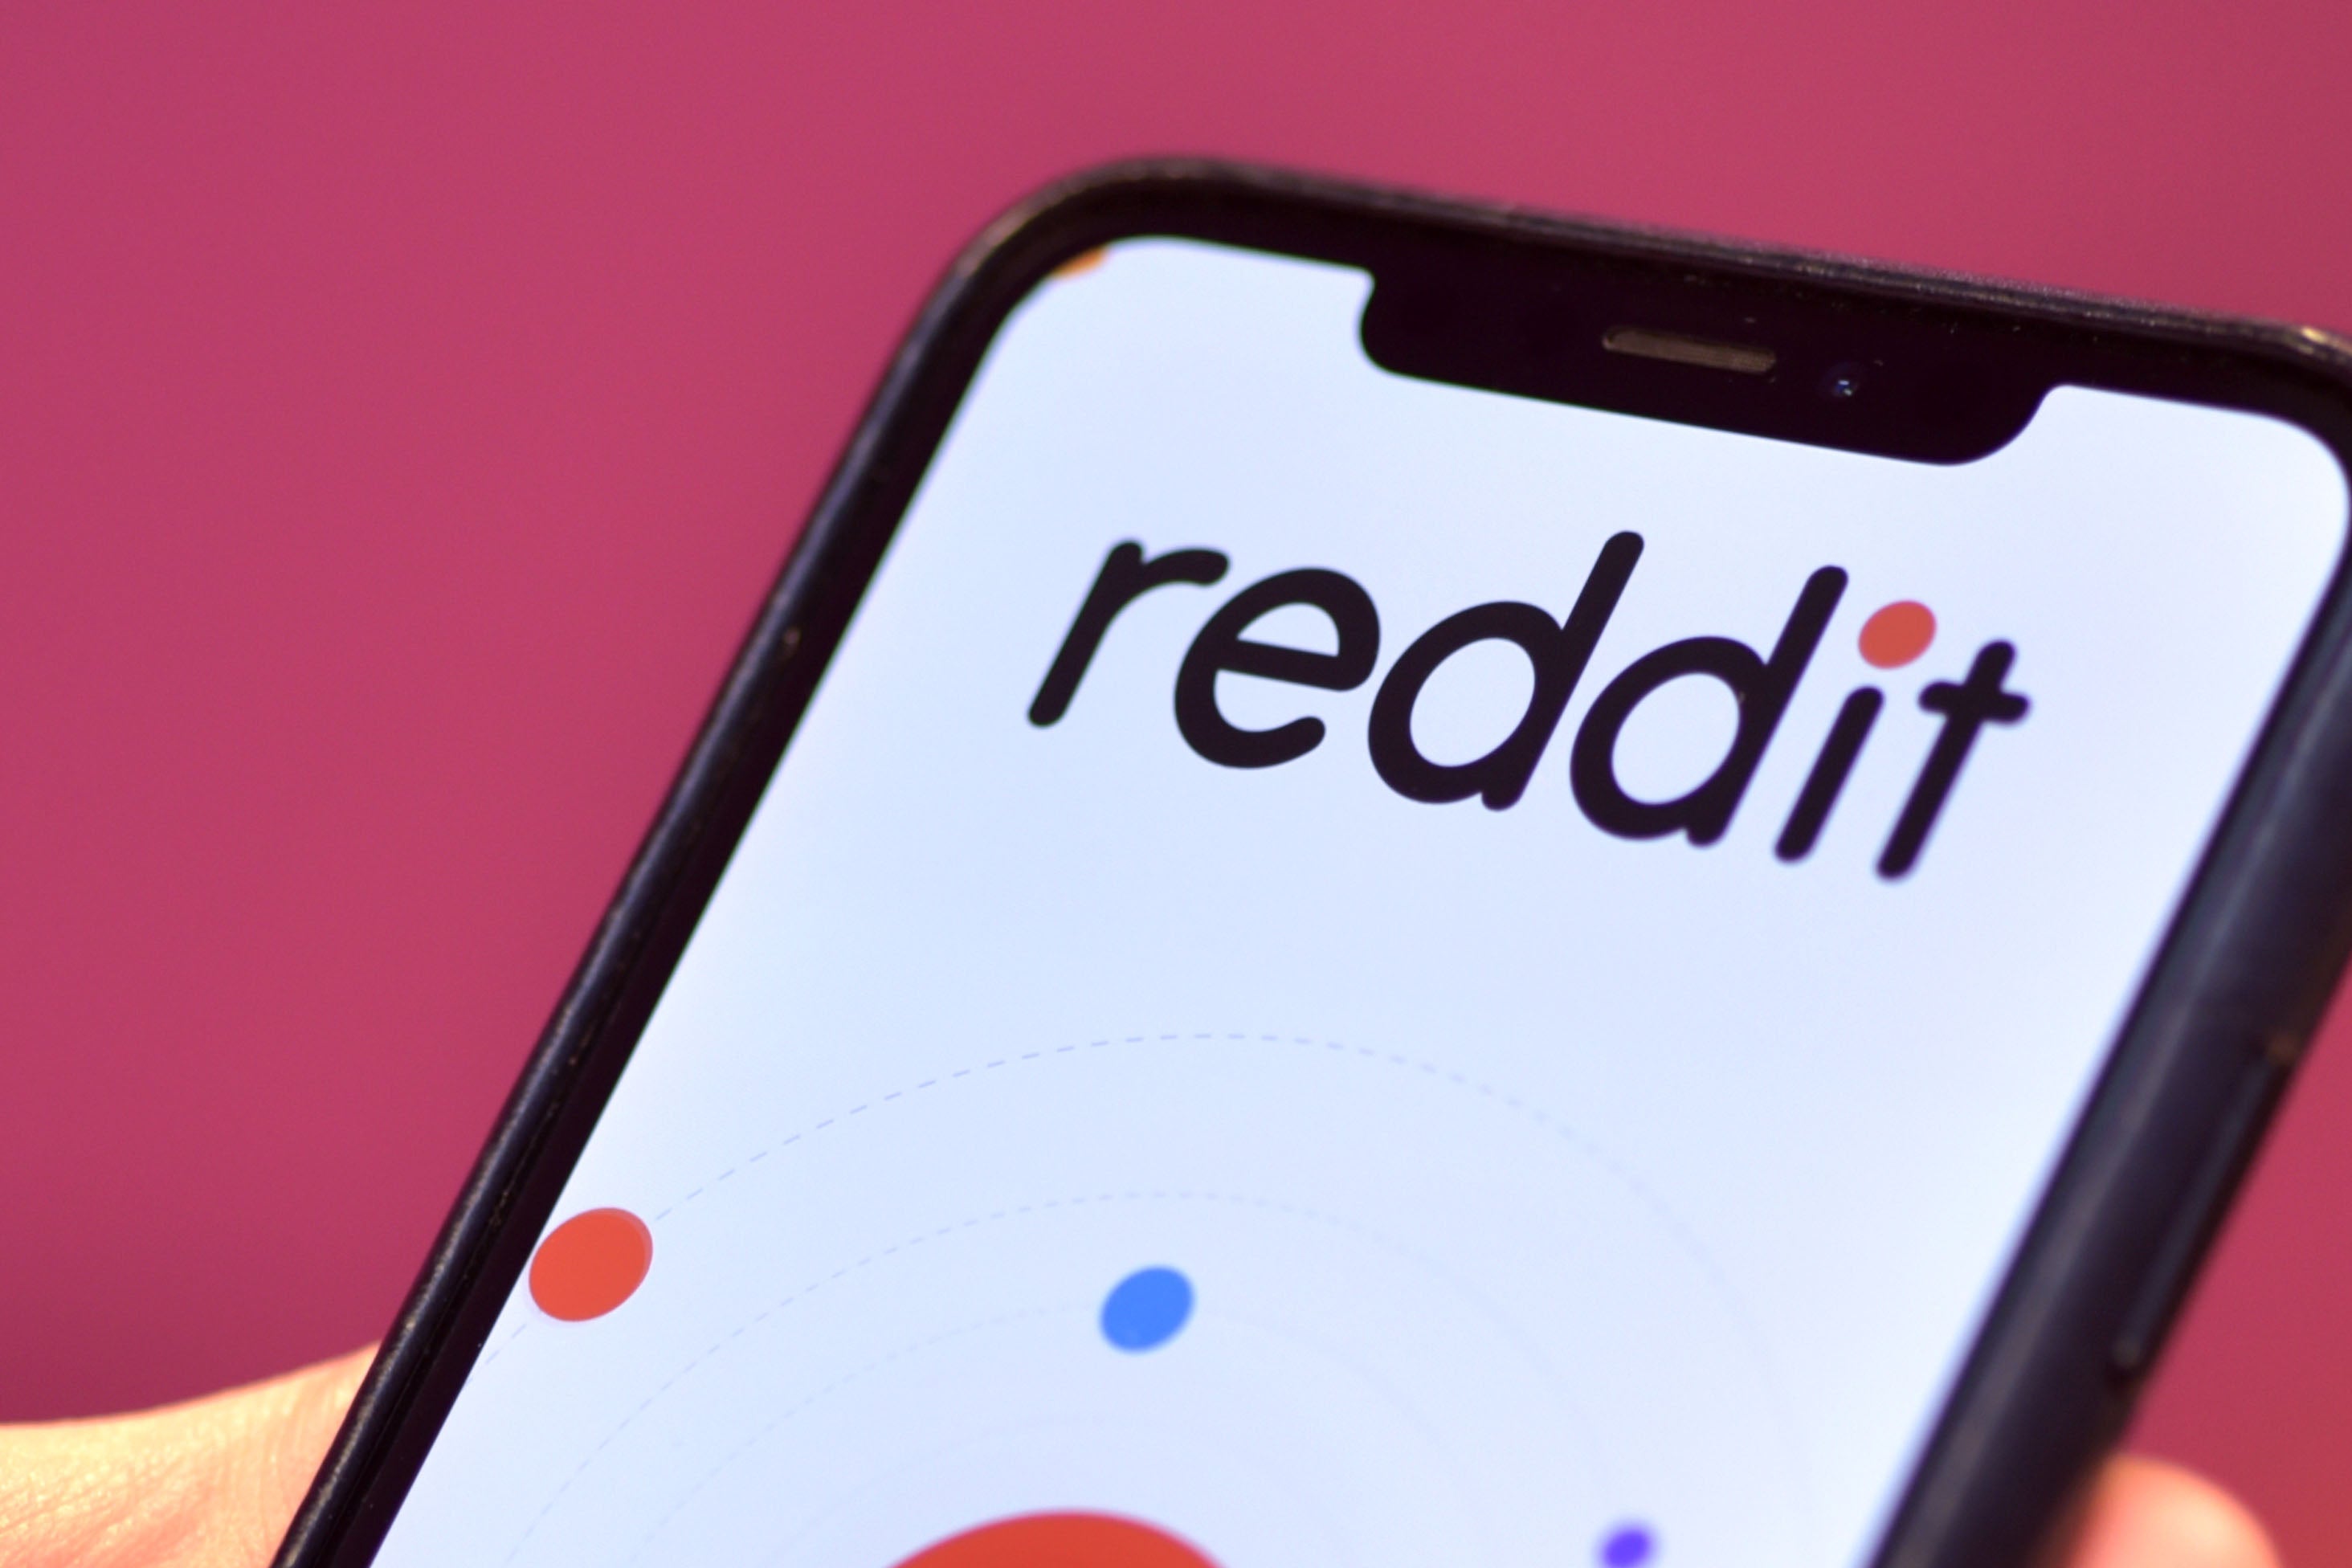 The Reddit logo displayed on a phone screen